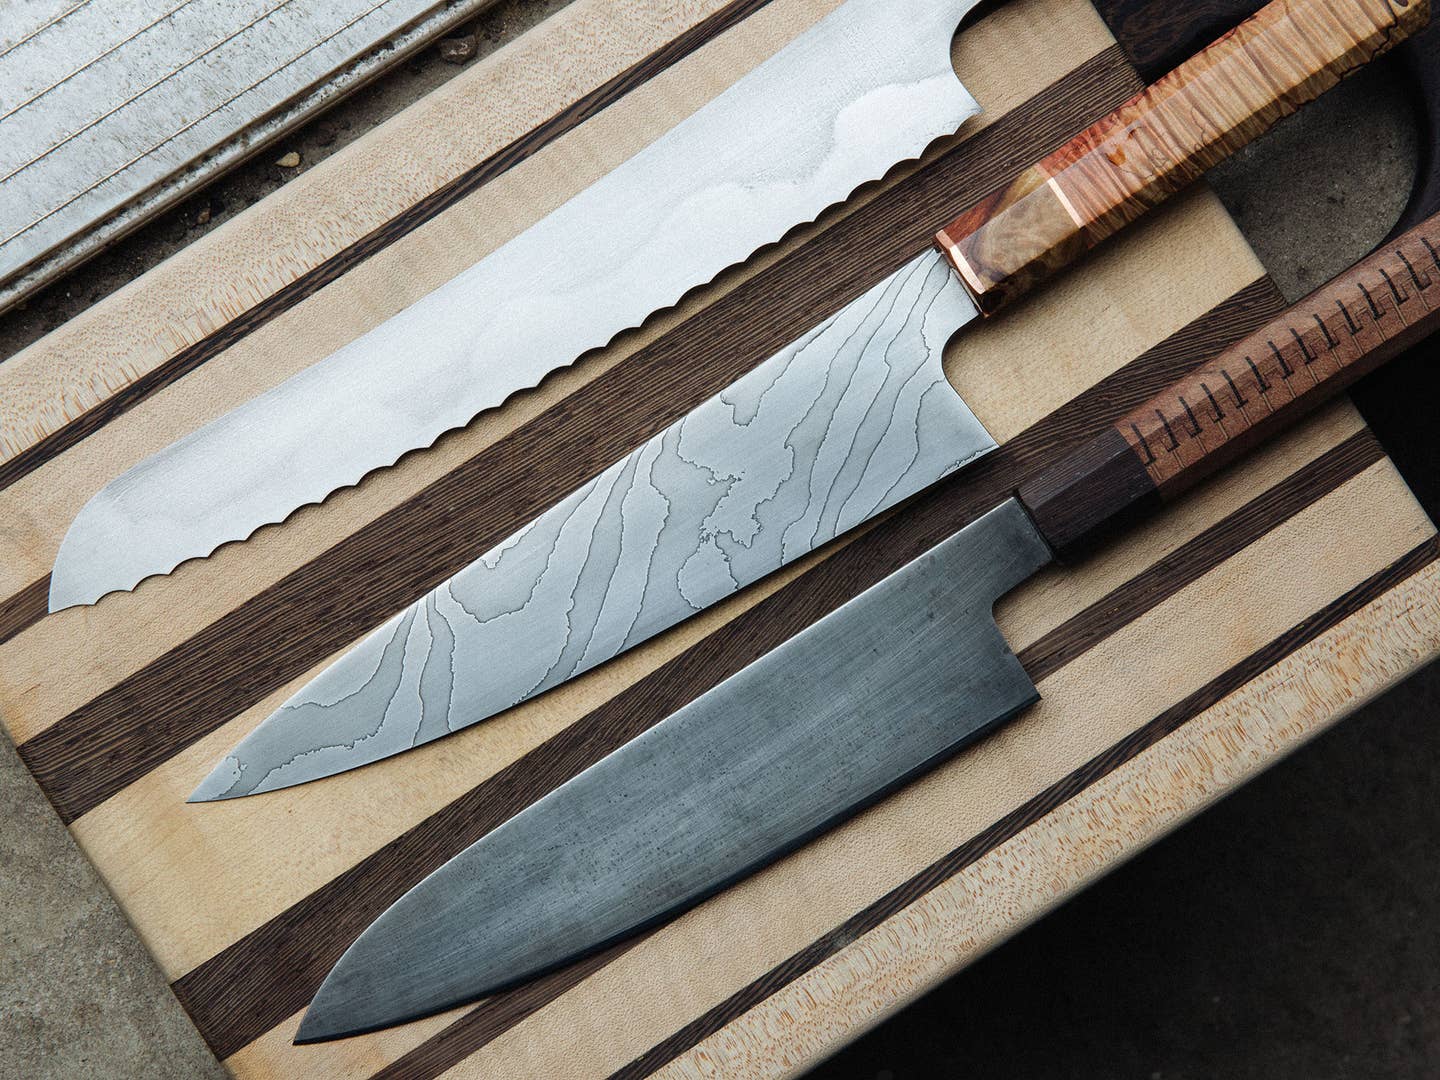 These Are Some of America’s Most Gorgeous Knives